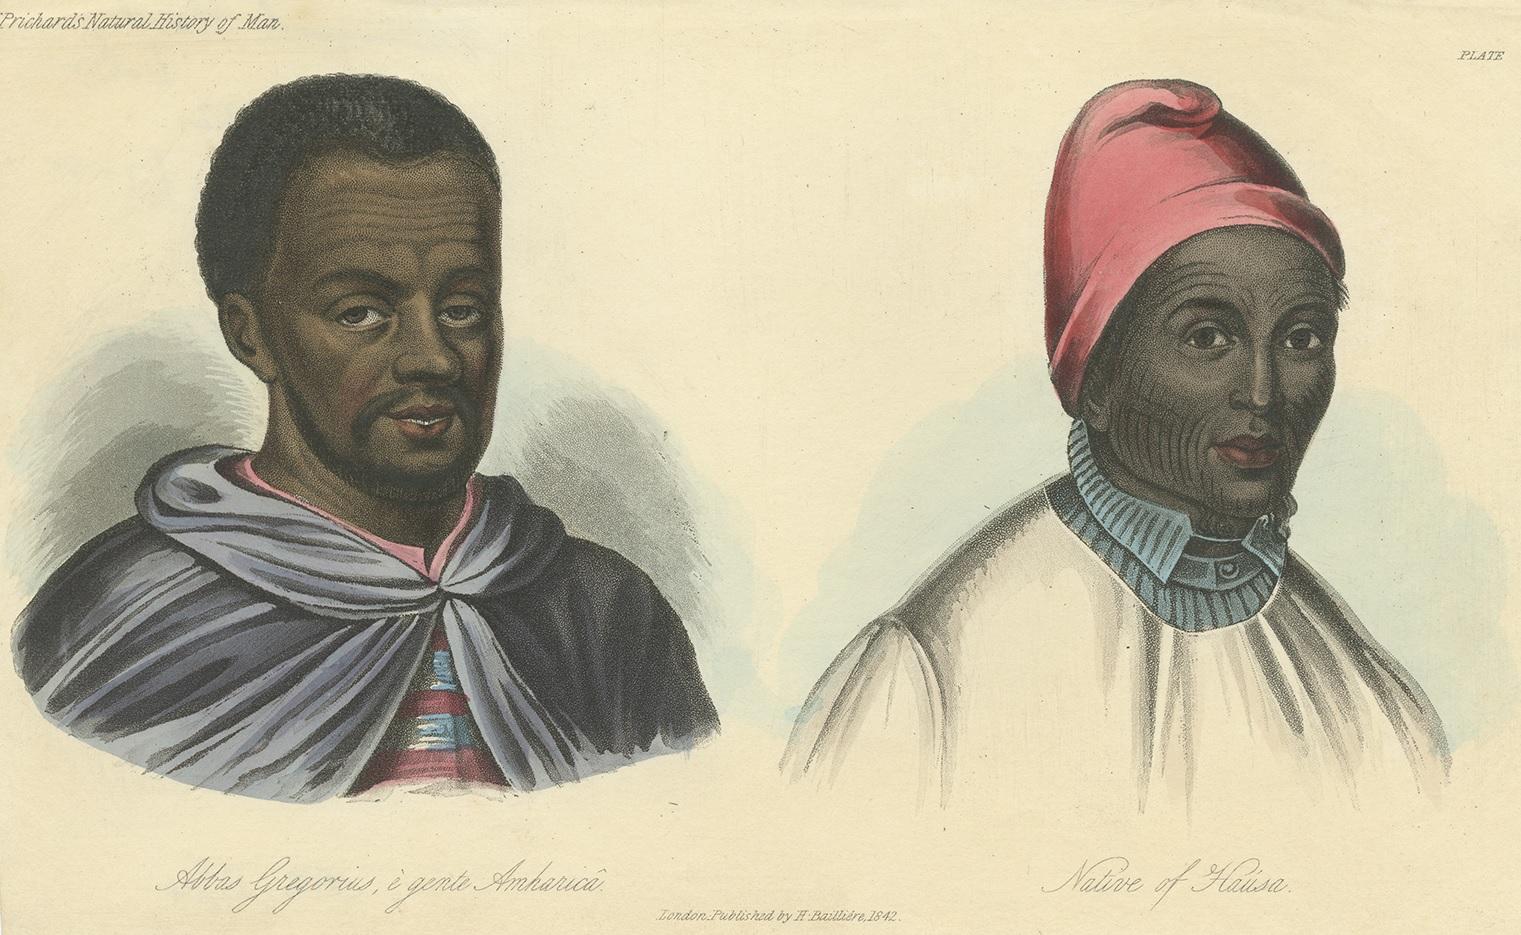 Antique print titled 'Abbas Gregorius, è gente Amharica - Native of Hausa'. Antique print of Abbas Gregorius, an Amharic Ethiopian, and Hausa man of West Africa. This print originates from 'Natural History of Man' by J.C. Prichard. A wonderful